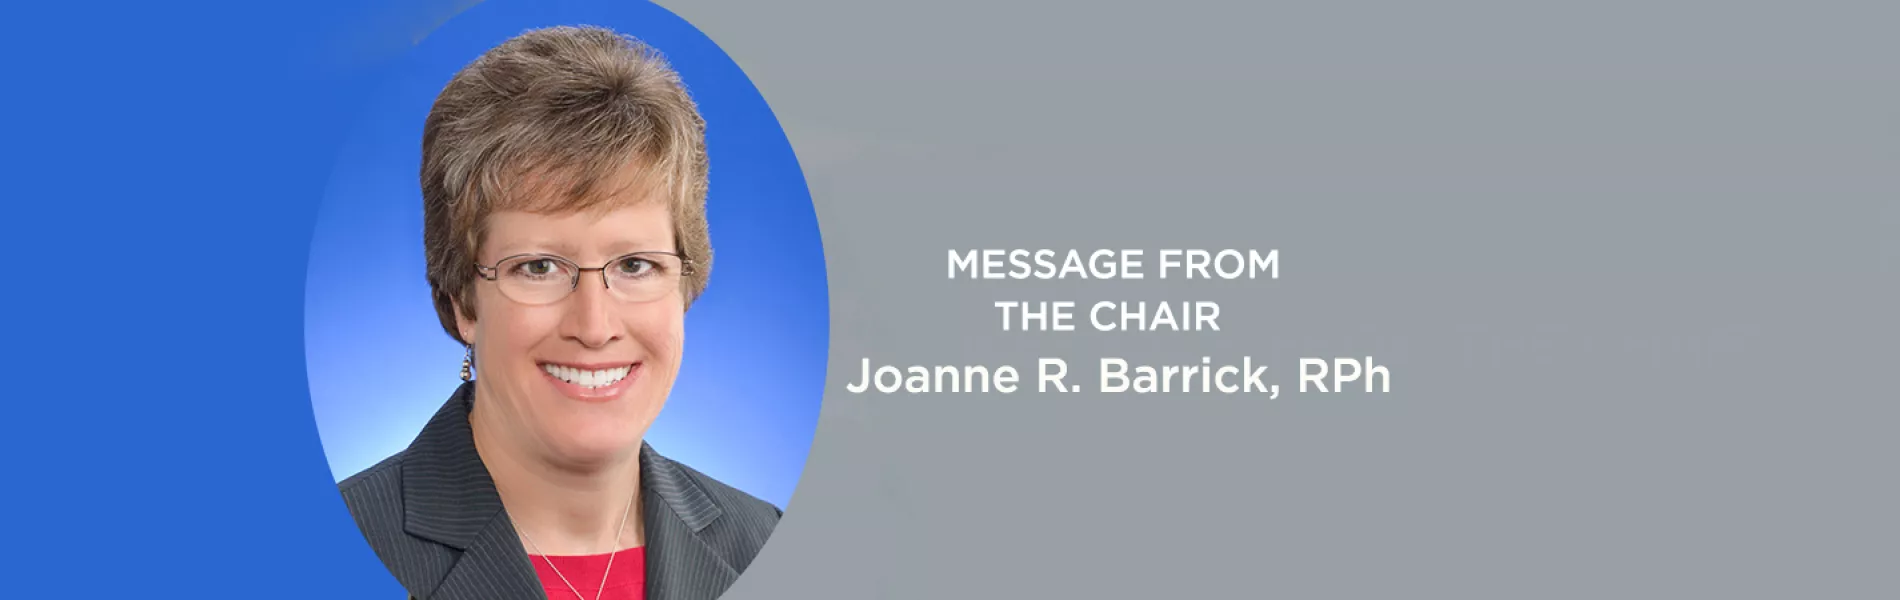 Message from the Chair: Joanne R. Barrick